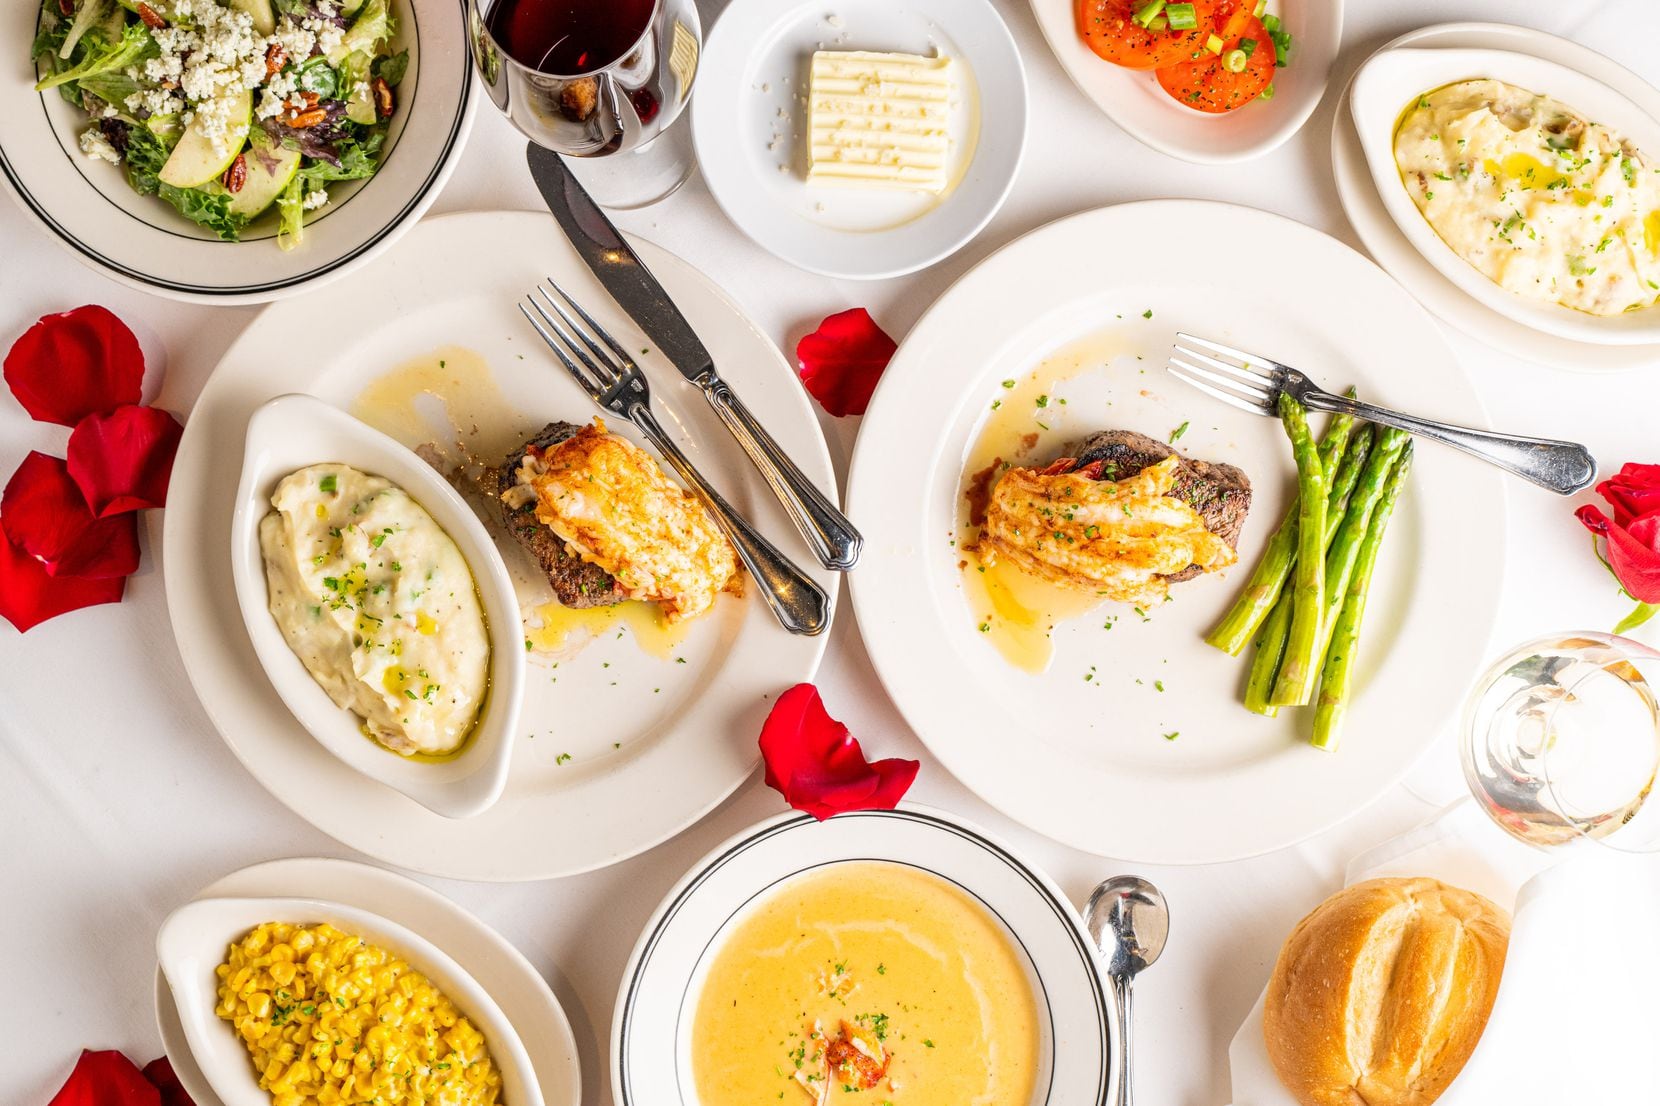 Silver Fox's Valentine's menu includes vine-ripened tomatoes, filet mignon topped with cold water lobster tail with whipped potatoes and asparagus, lobster bisque, off-the-cob creamed corn and III Forks salad.